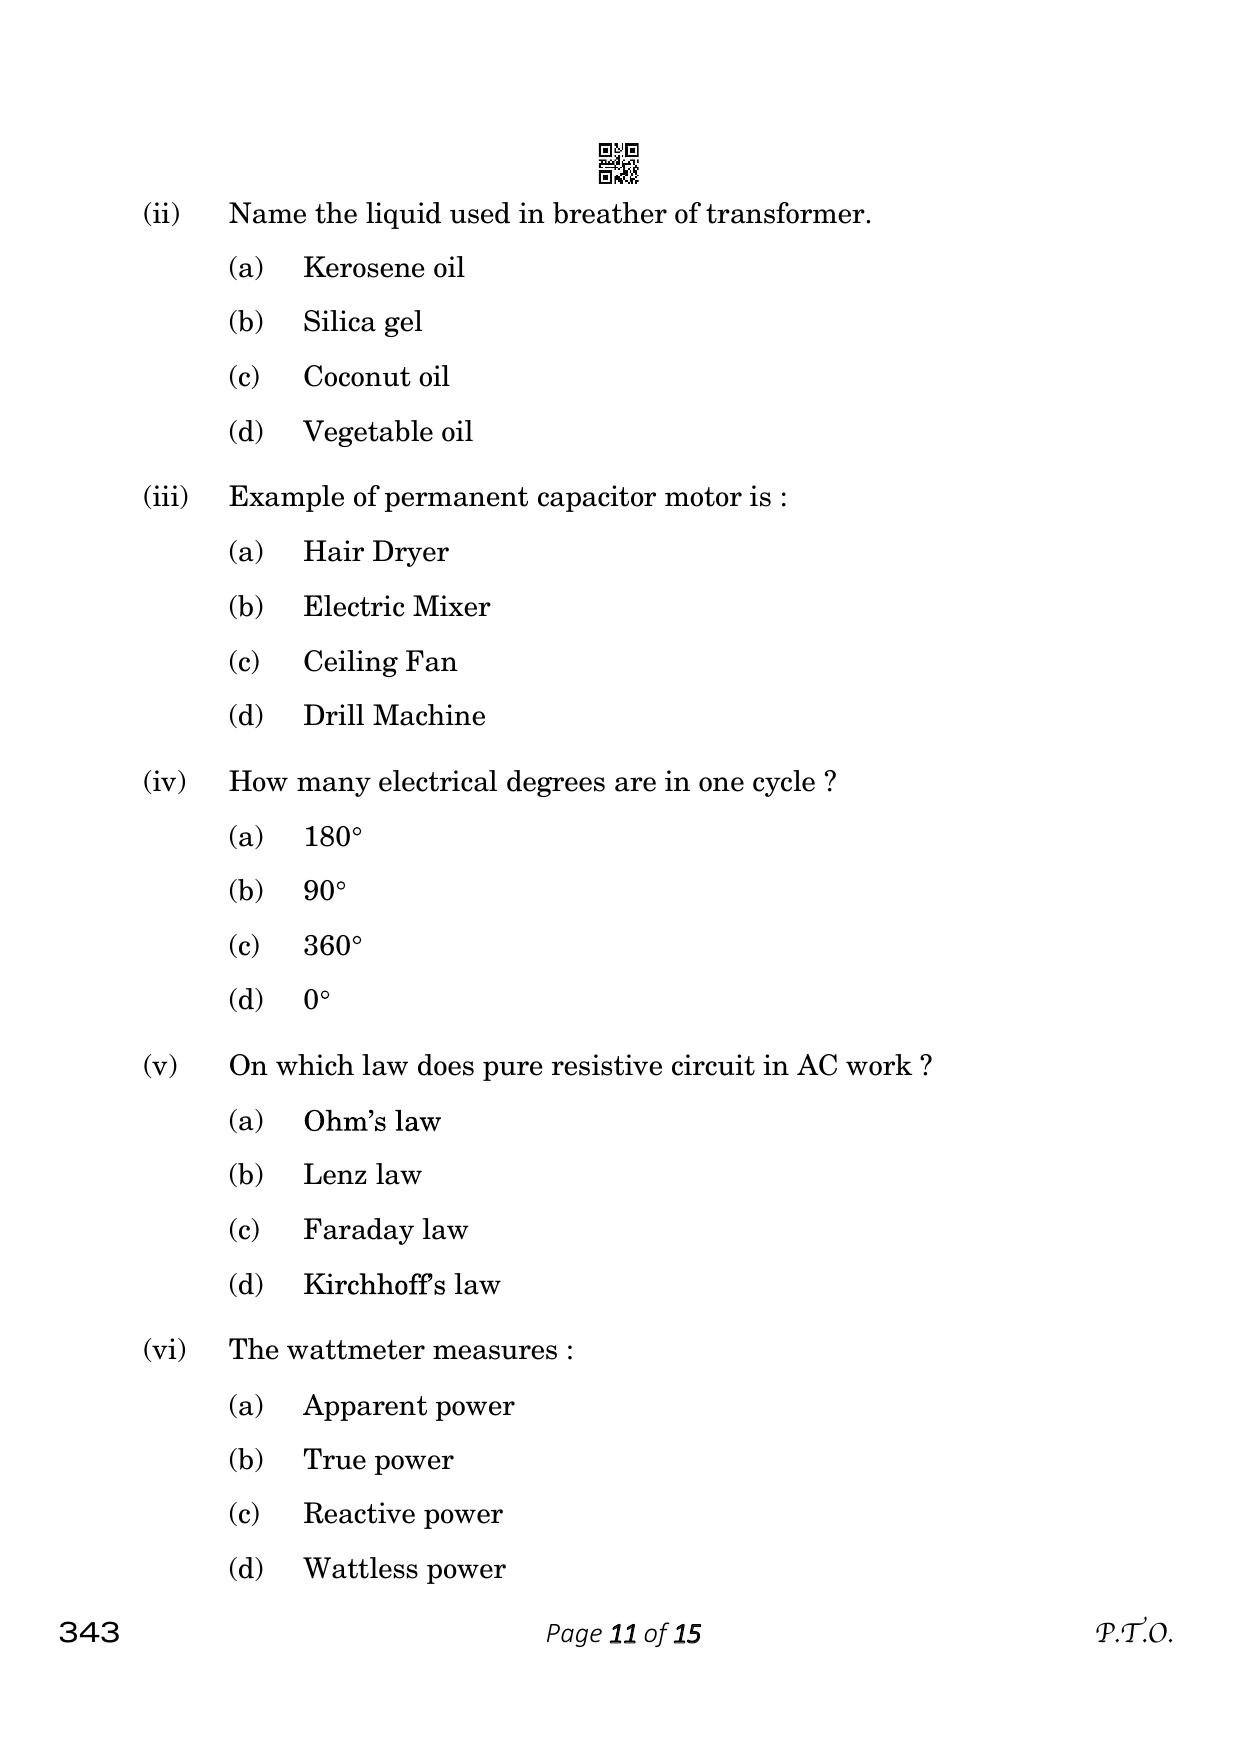 CBSE Class 12 343_Electrical Technology 2023 Question Paper - Page 11